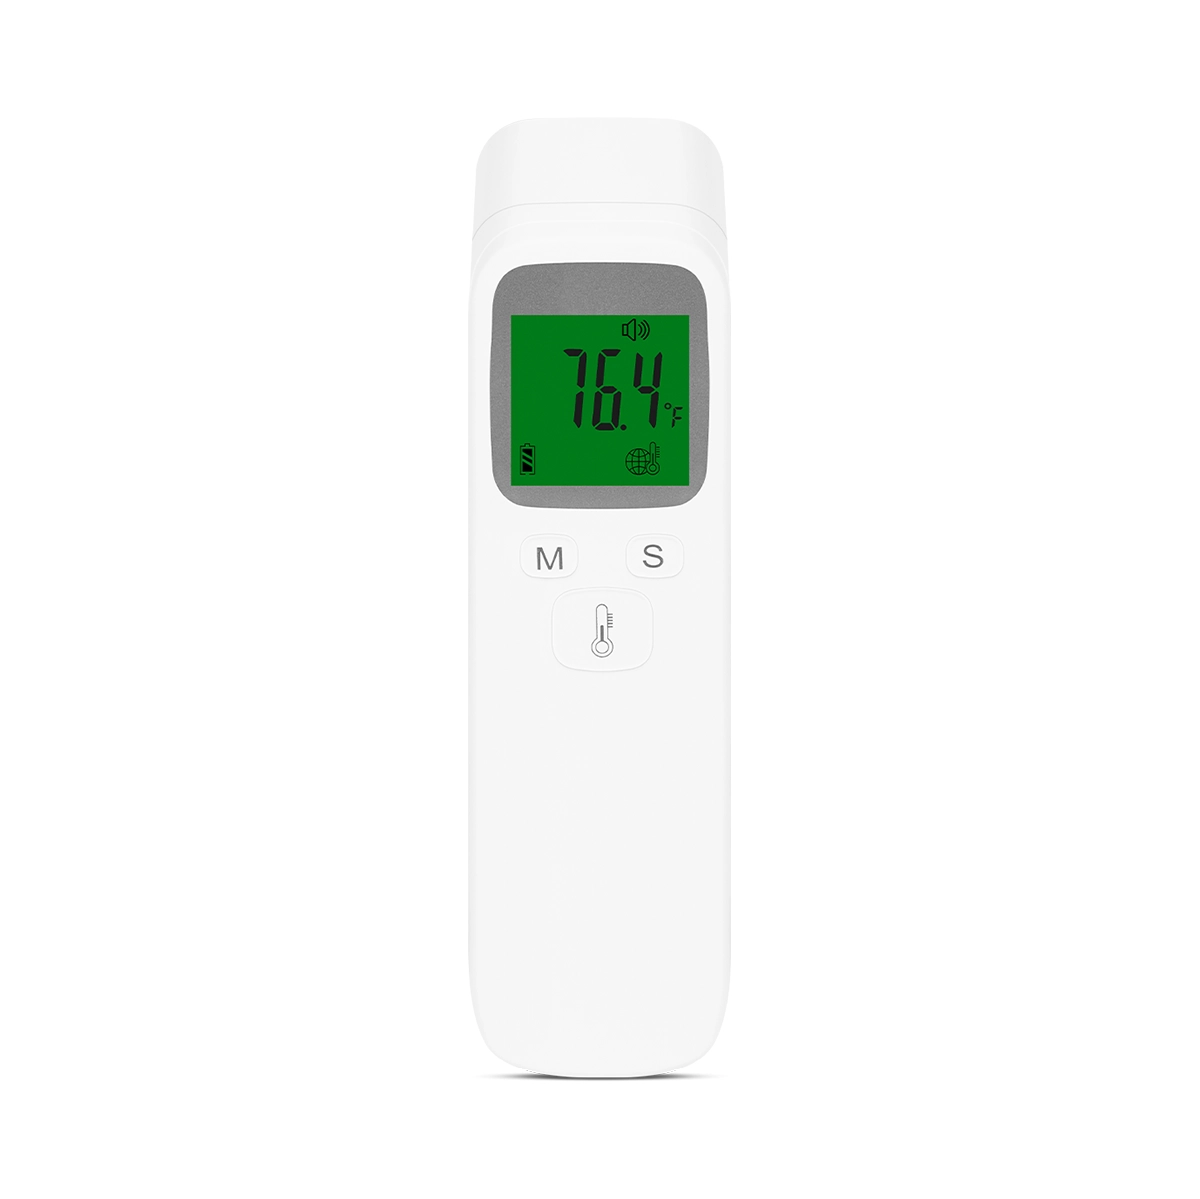 Infrarot Fieber-Thermometer